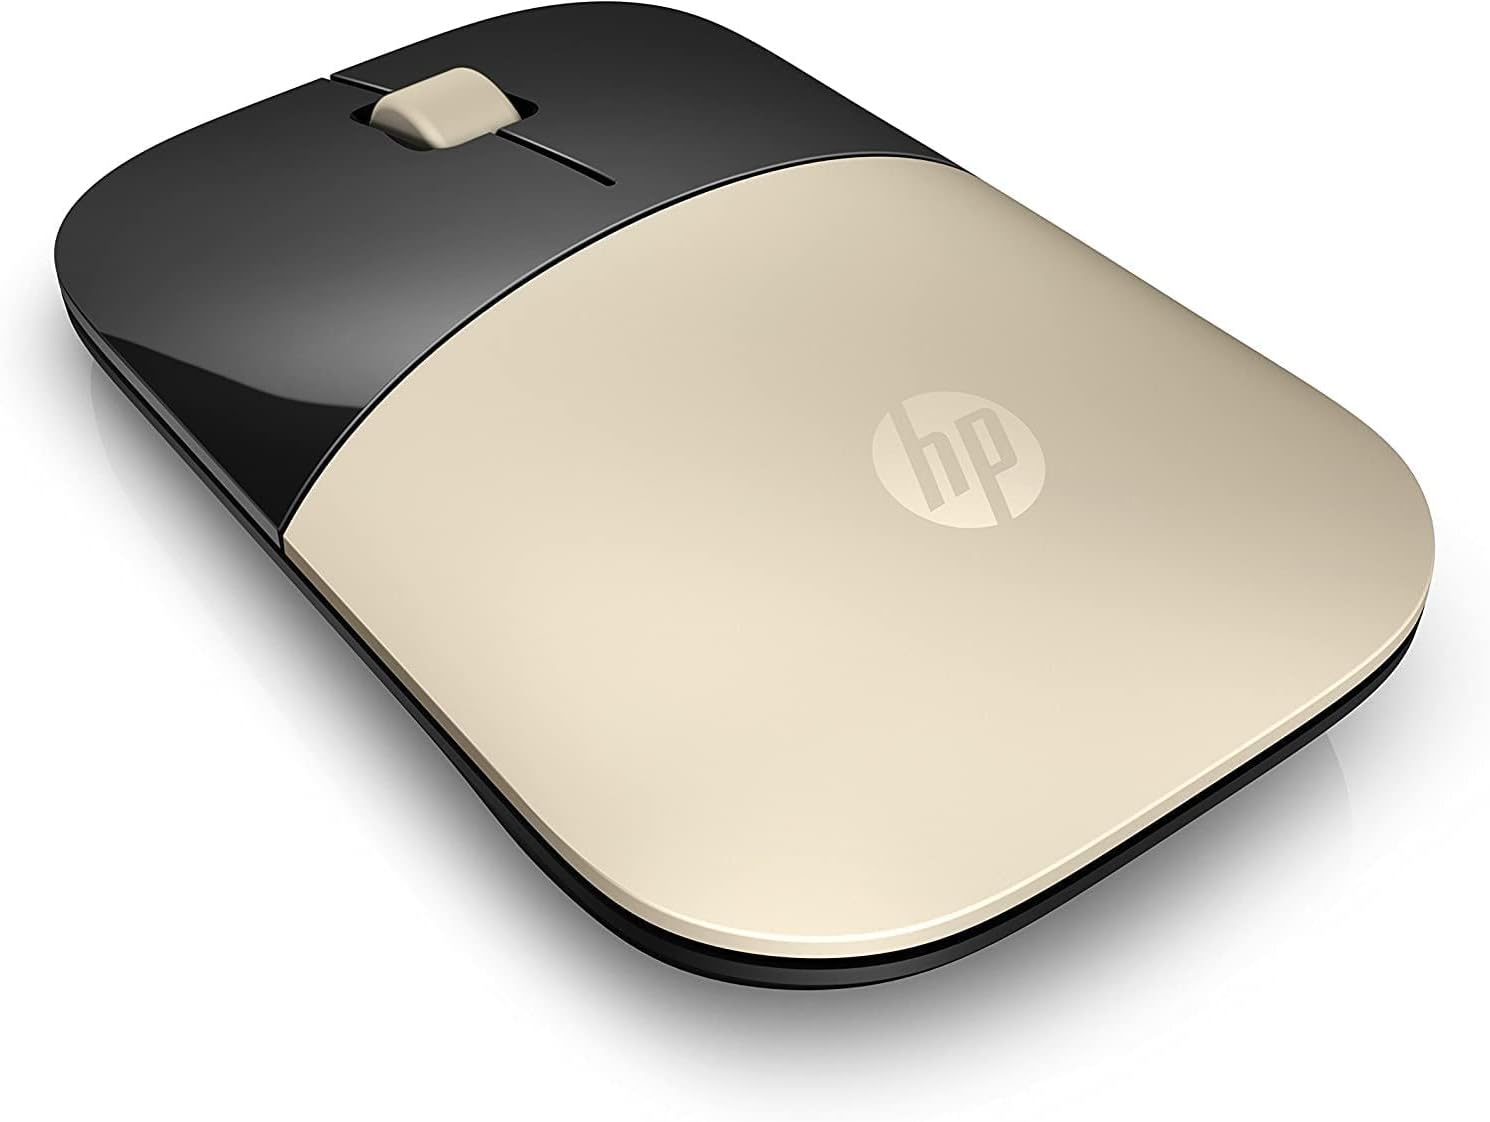 Mouse wireless HP